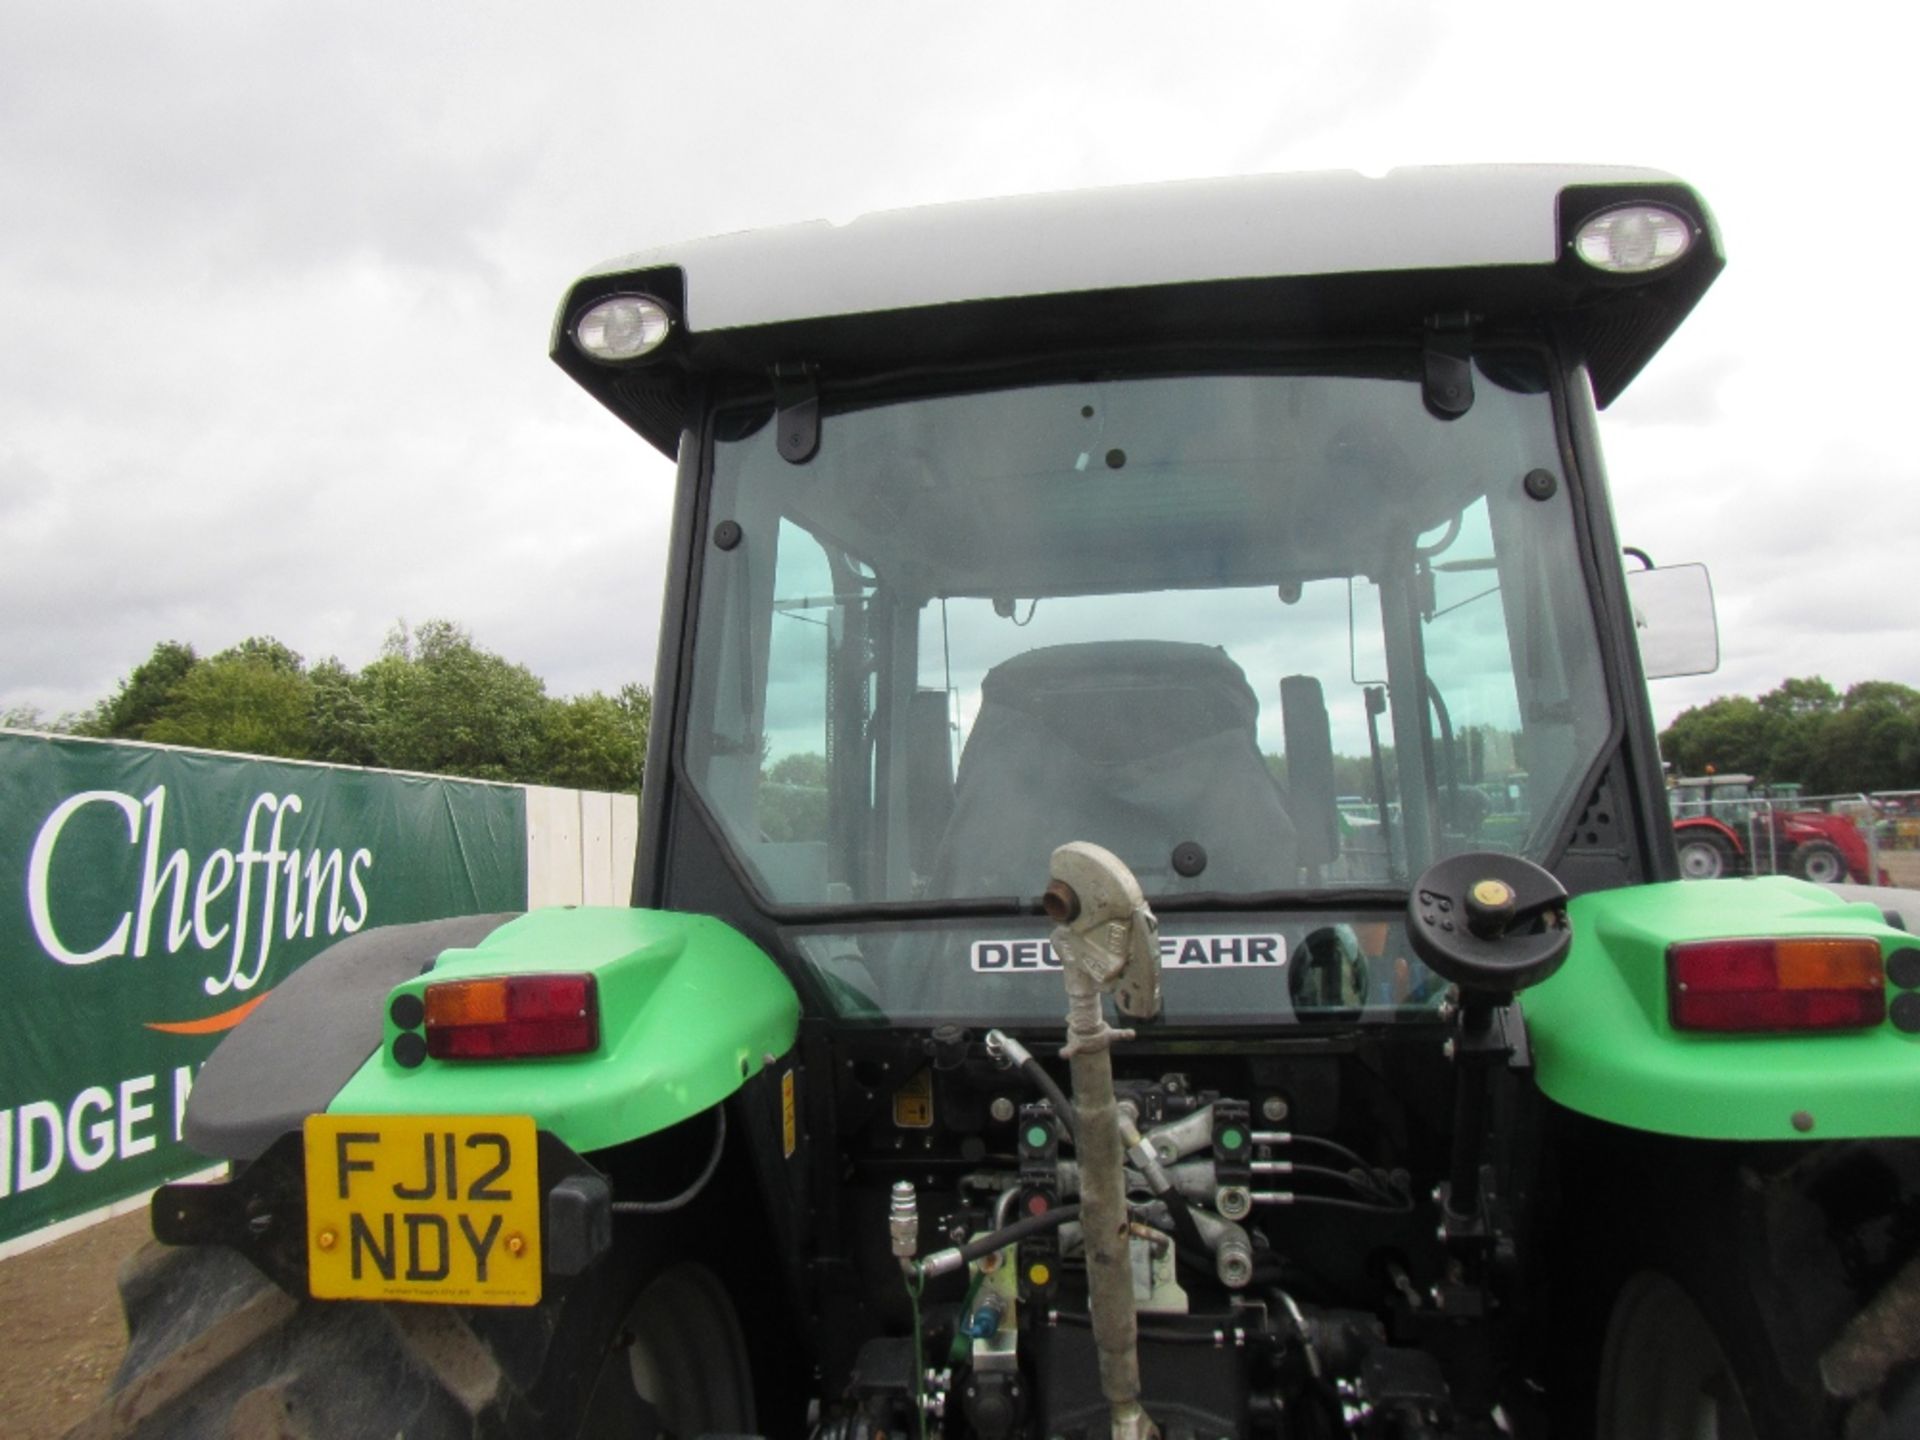 Deutz Agro Form 420 GS Tractor with Quicke Q50 Loader Reg. No. FJ12 NDY Ser No TD21871 - Image 8 of 17